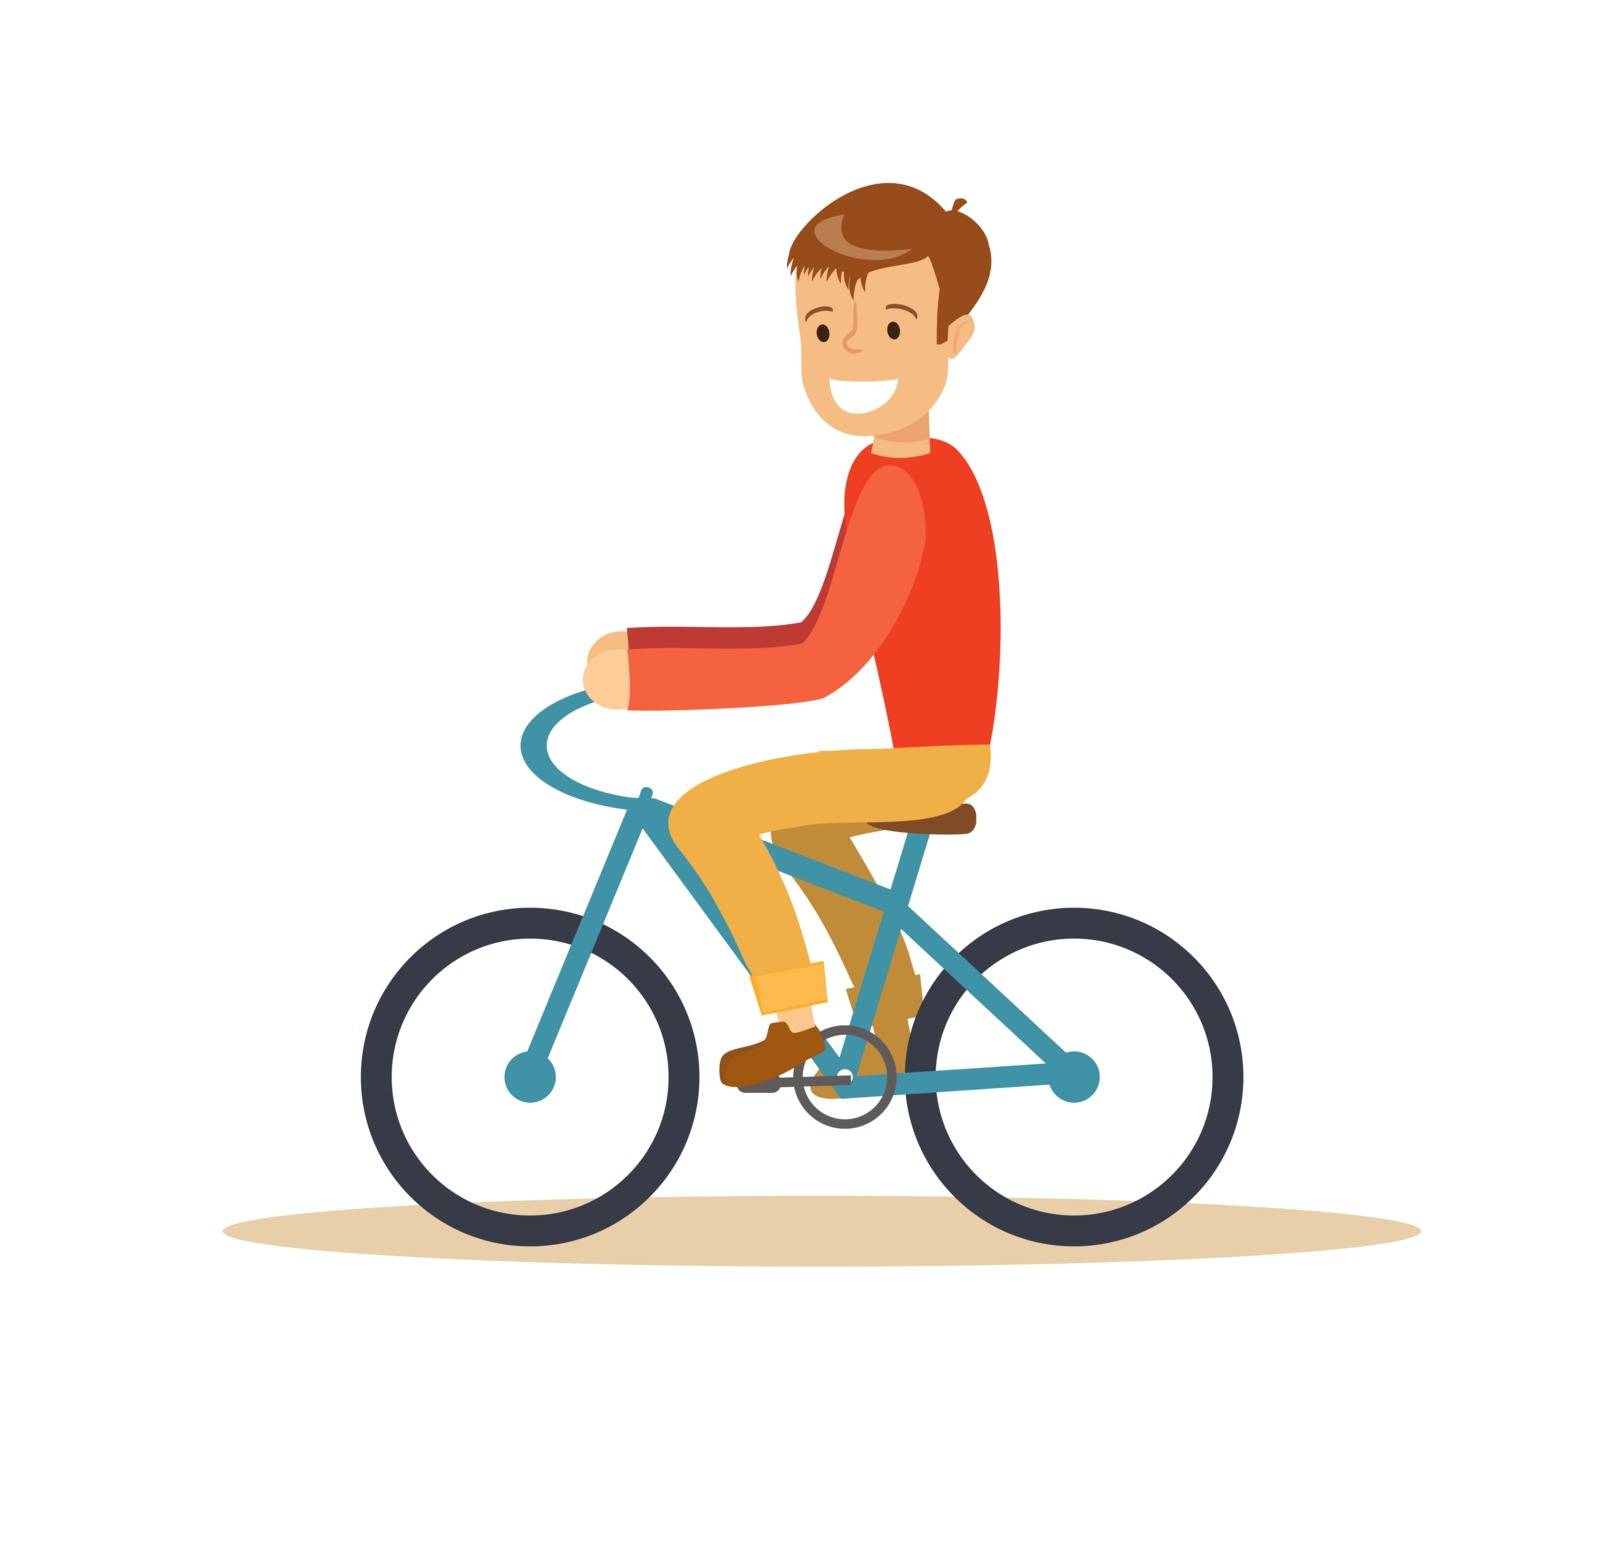 Illustration of a young boy riding a bicycle on a white background